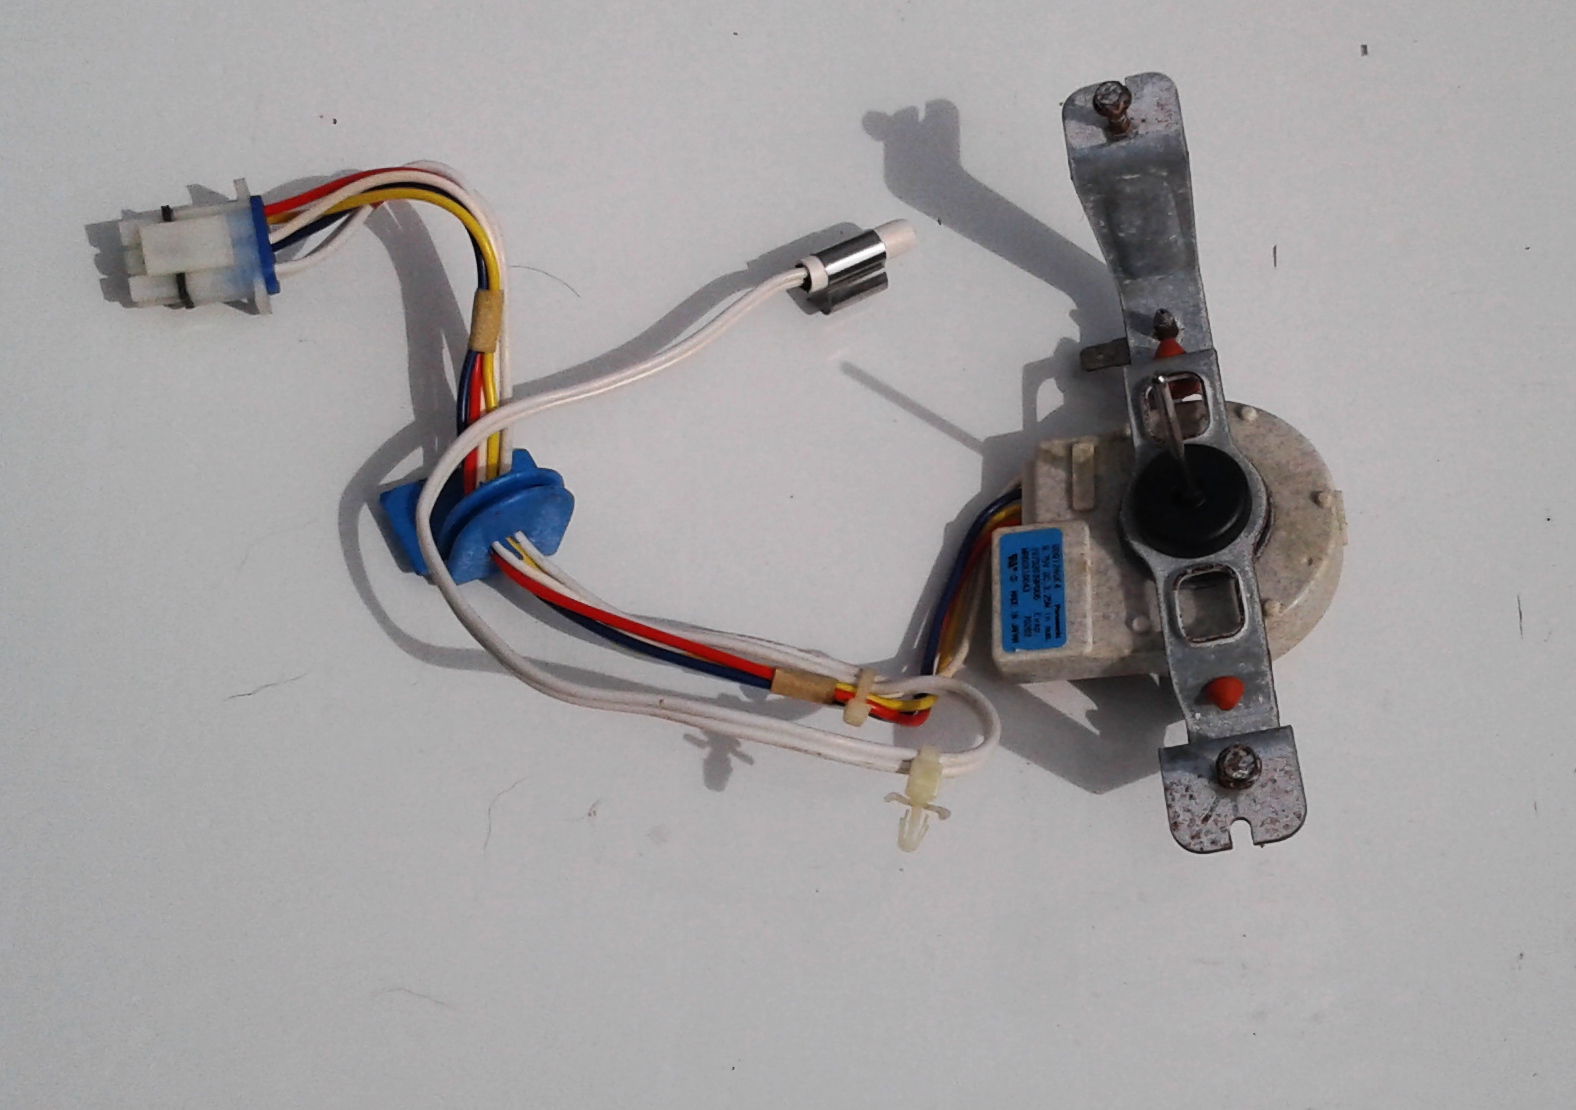 GE Evaporator Fan Motor WR60X10074 with Brackets and Temperature Sensor